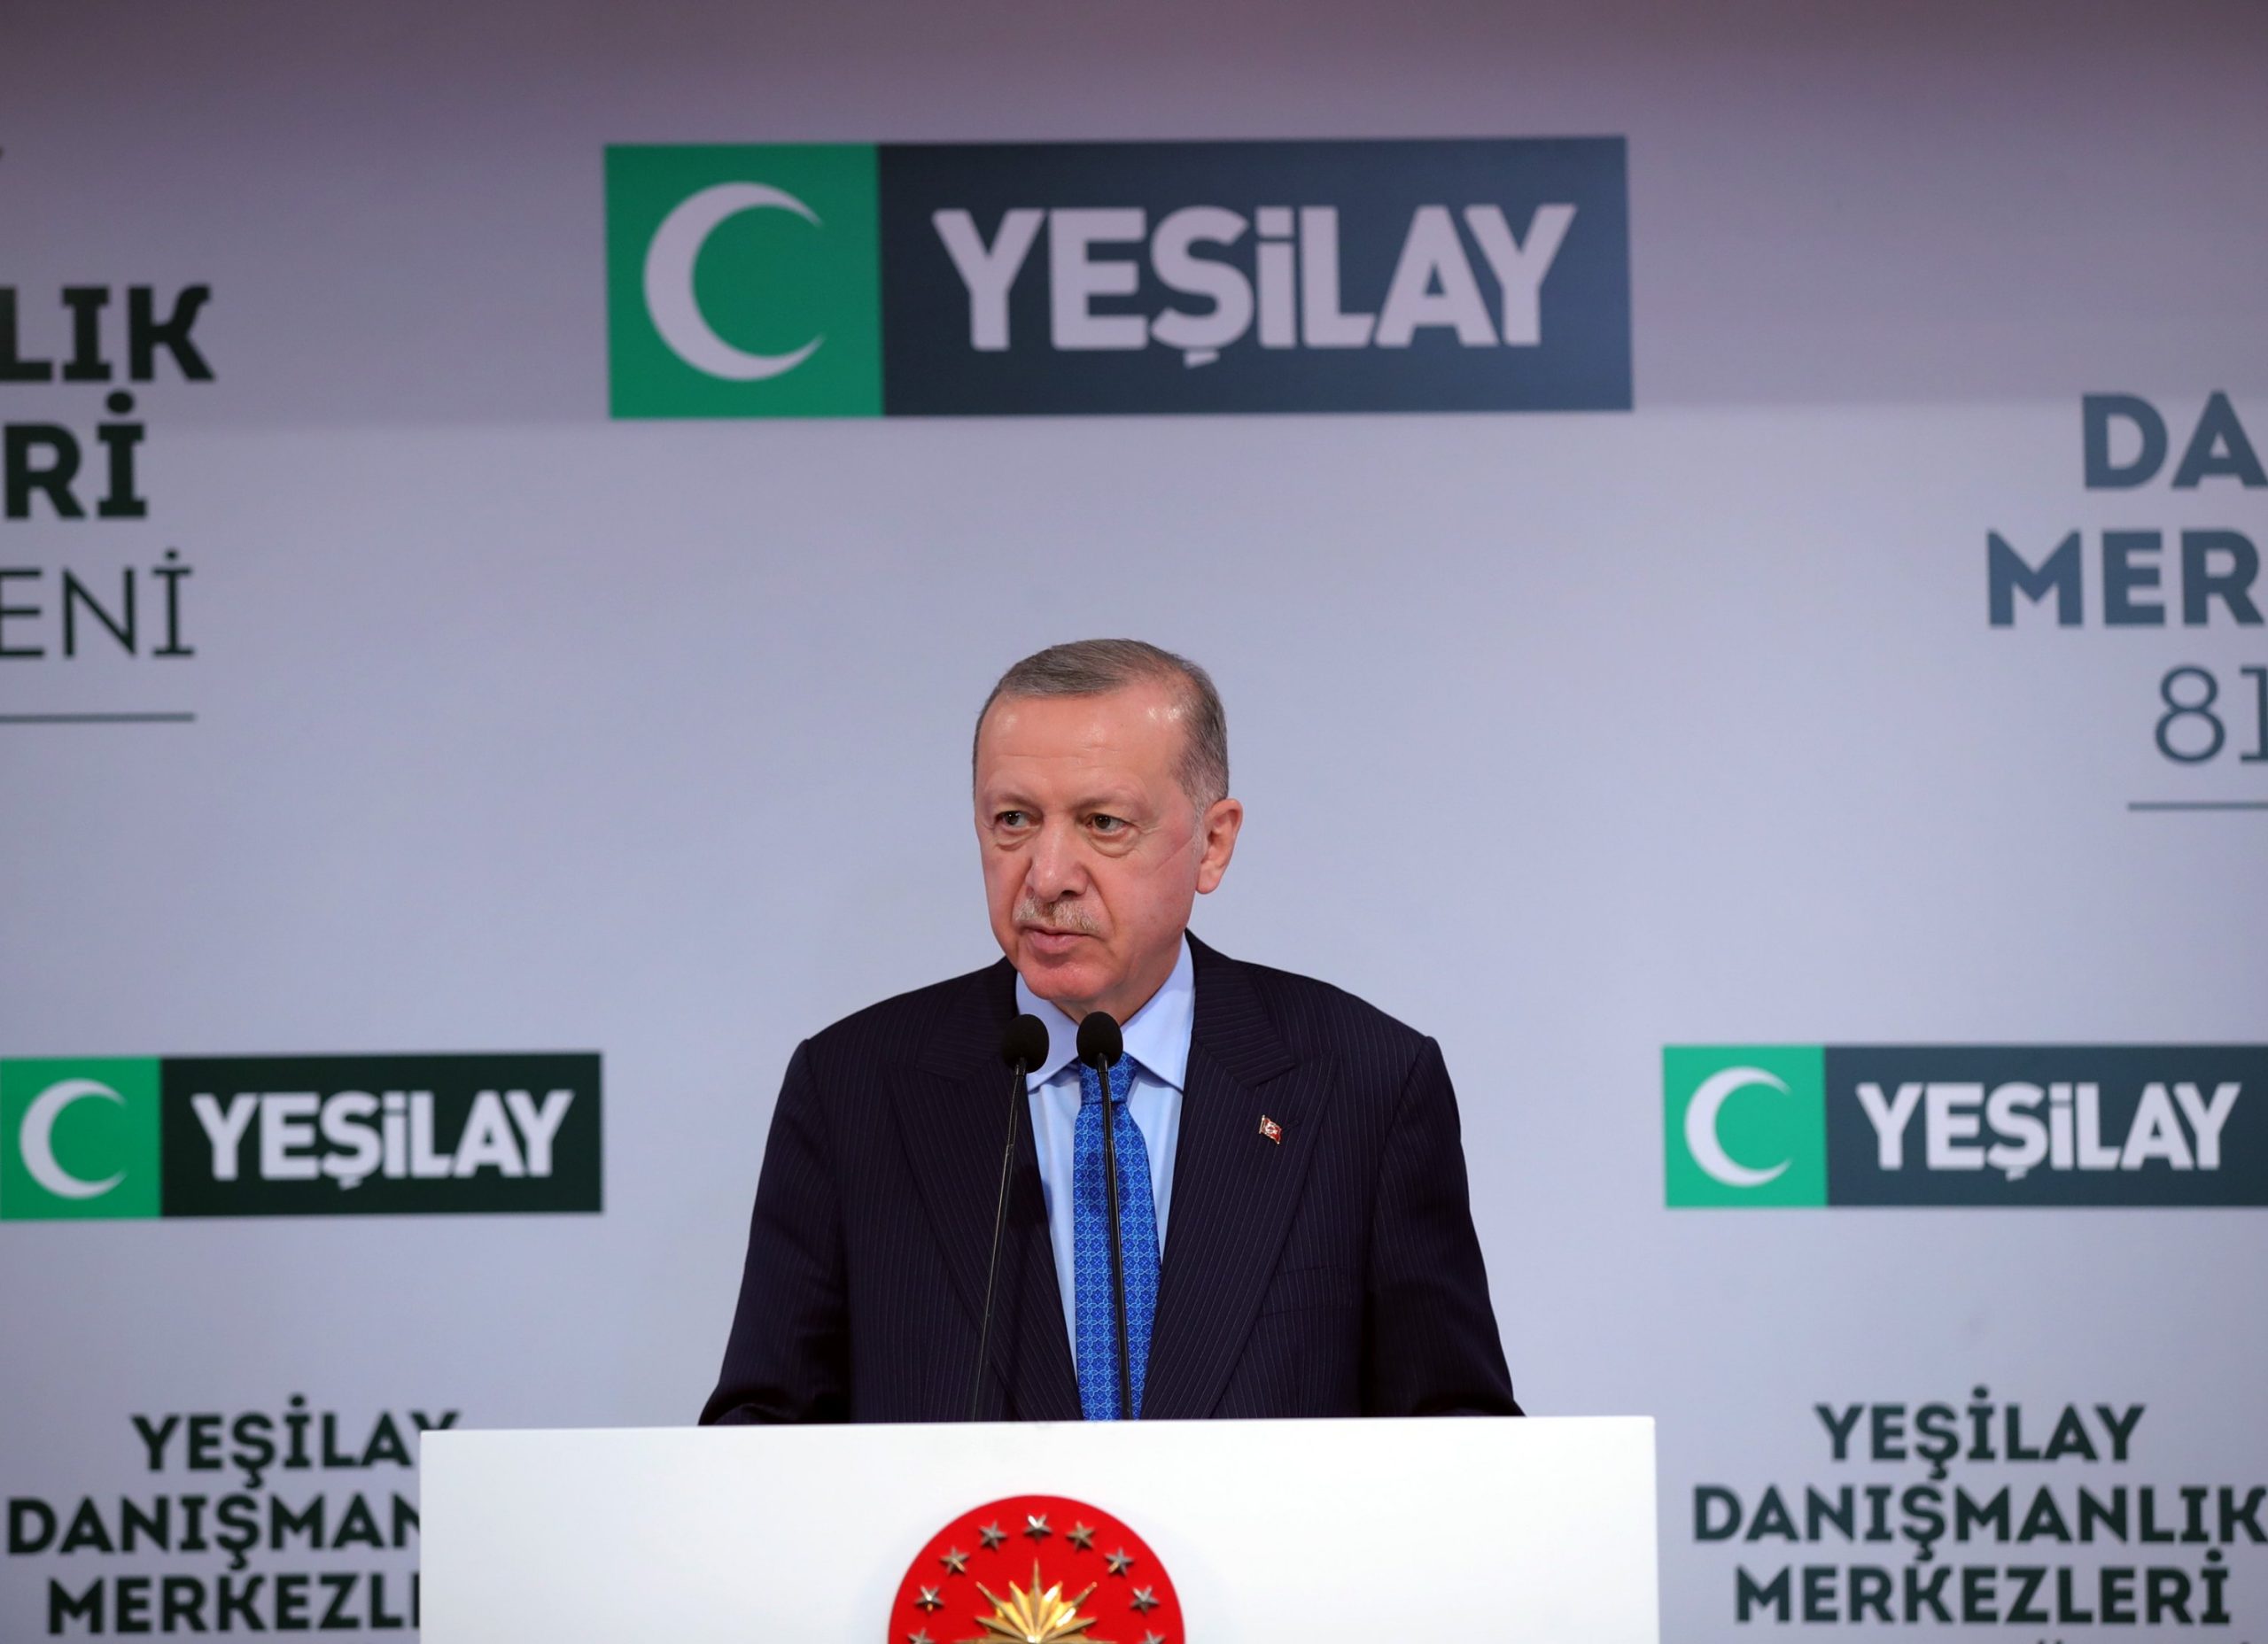 Turkey fights addictions with human-centric approach: Erdoğan